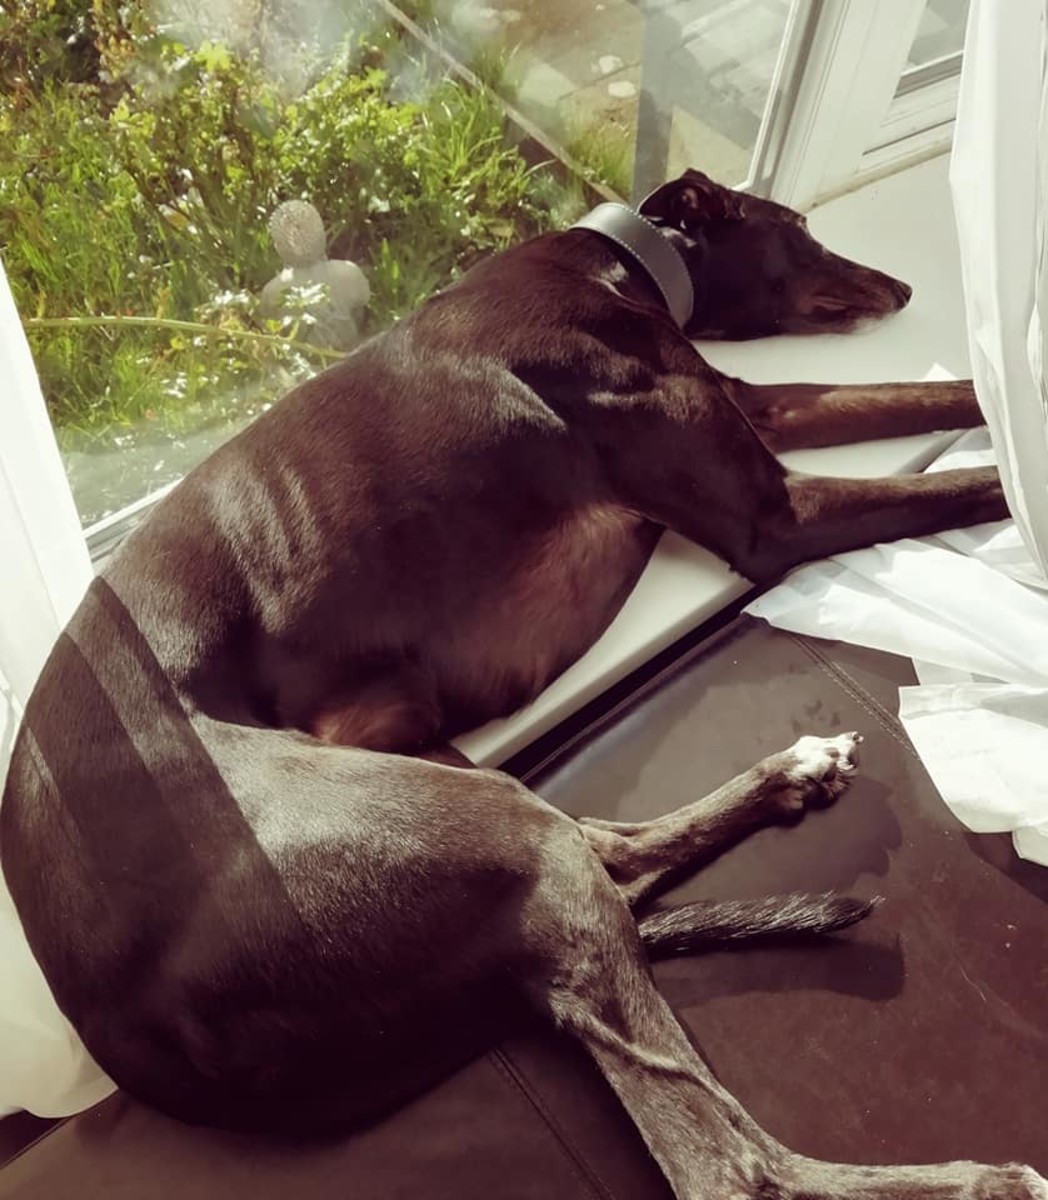 Our adopted rescue greyhound loves to spread out in the sun on the window sill